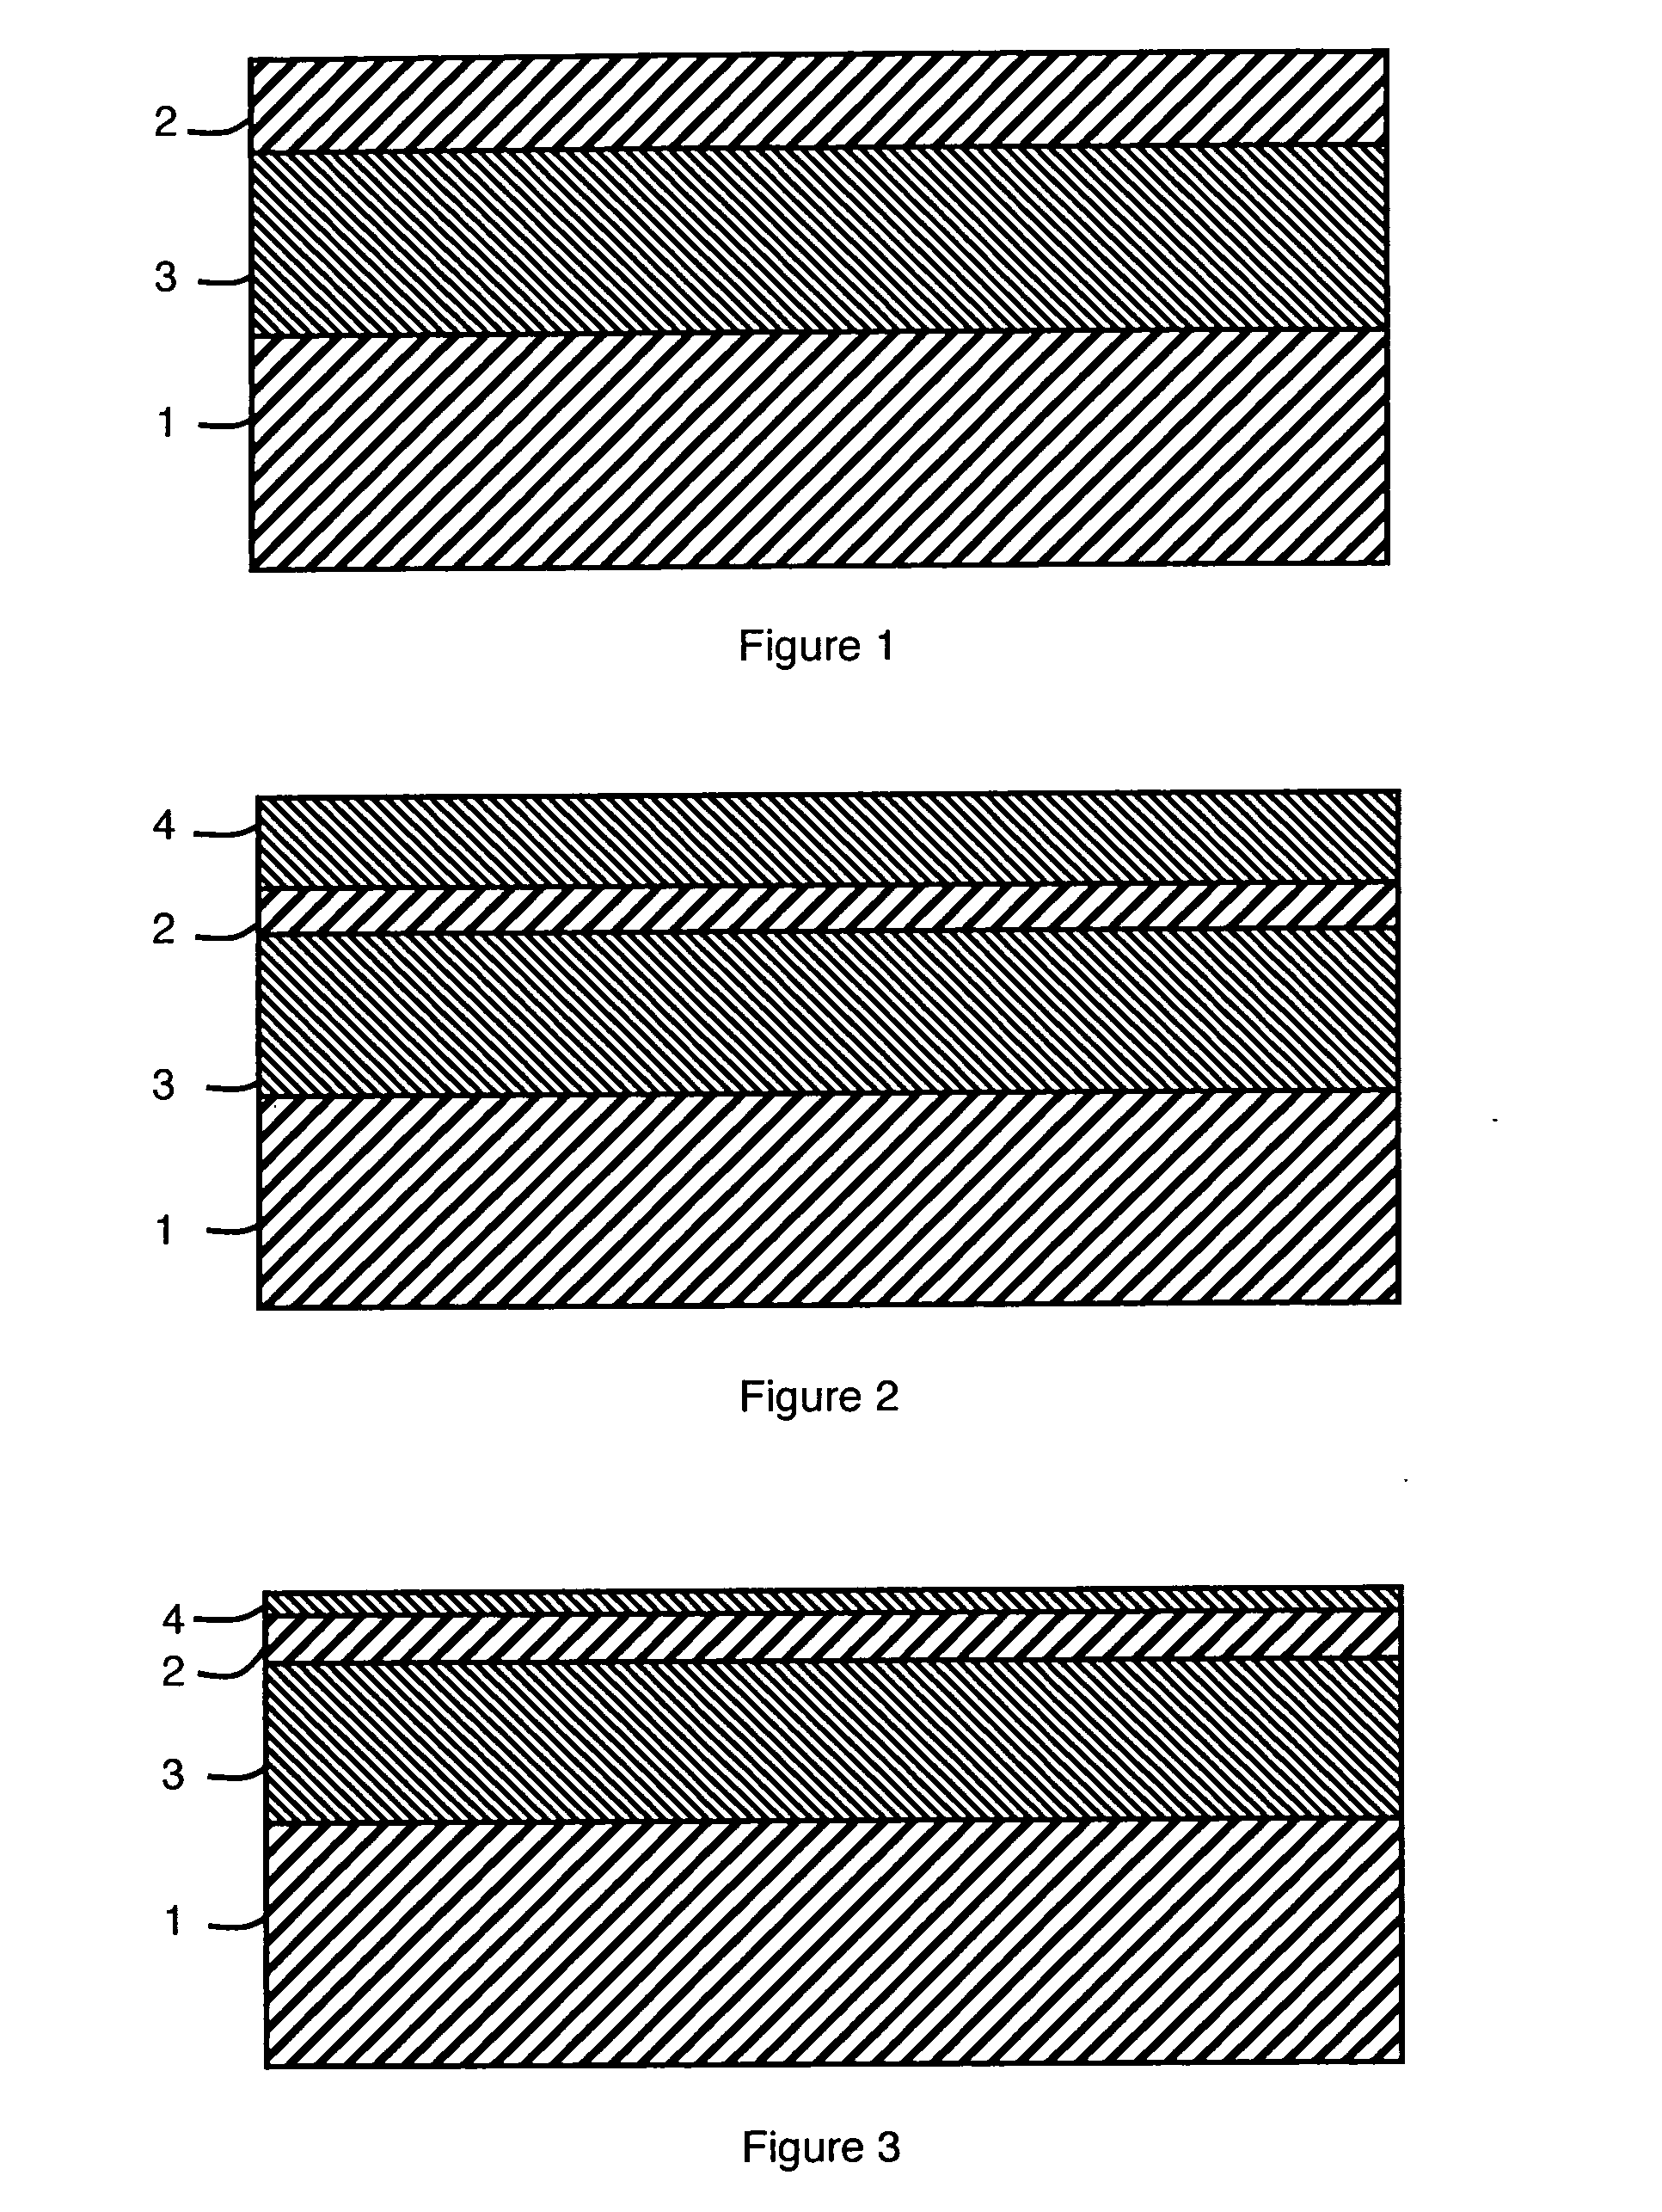 Process for Fabricating a Field-Effect Transistor with Self-Aligned Gates